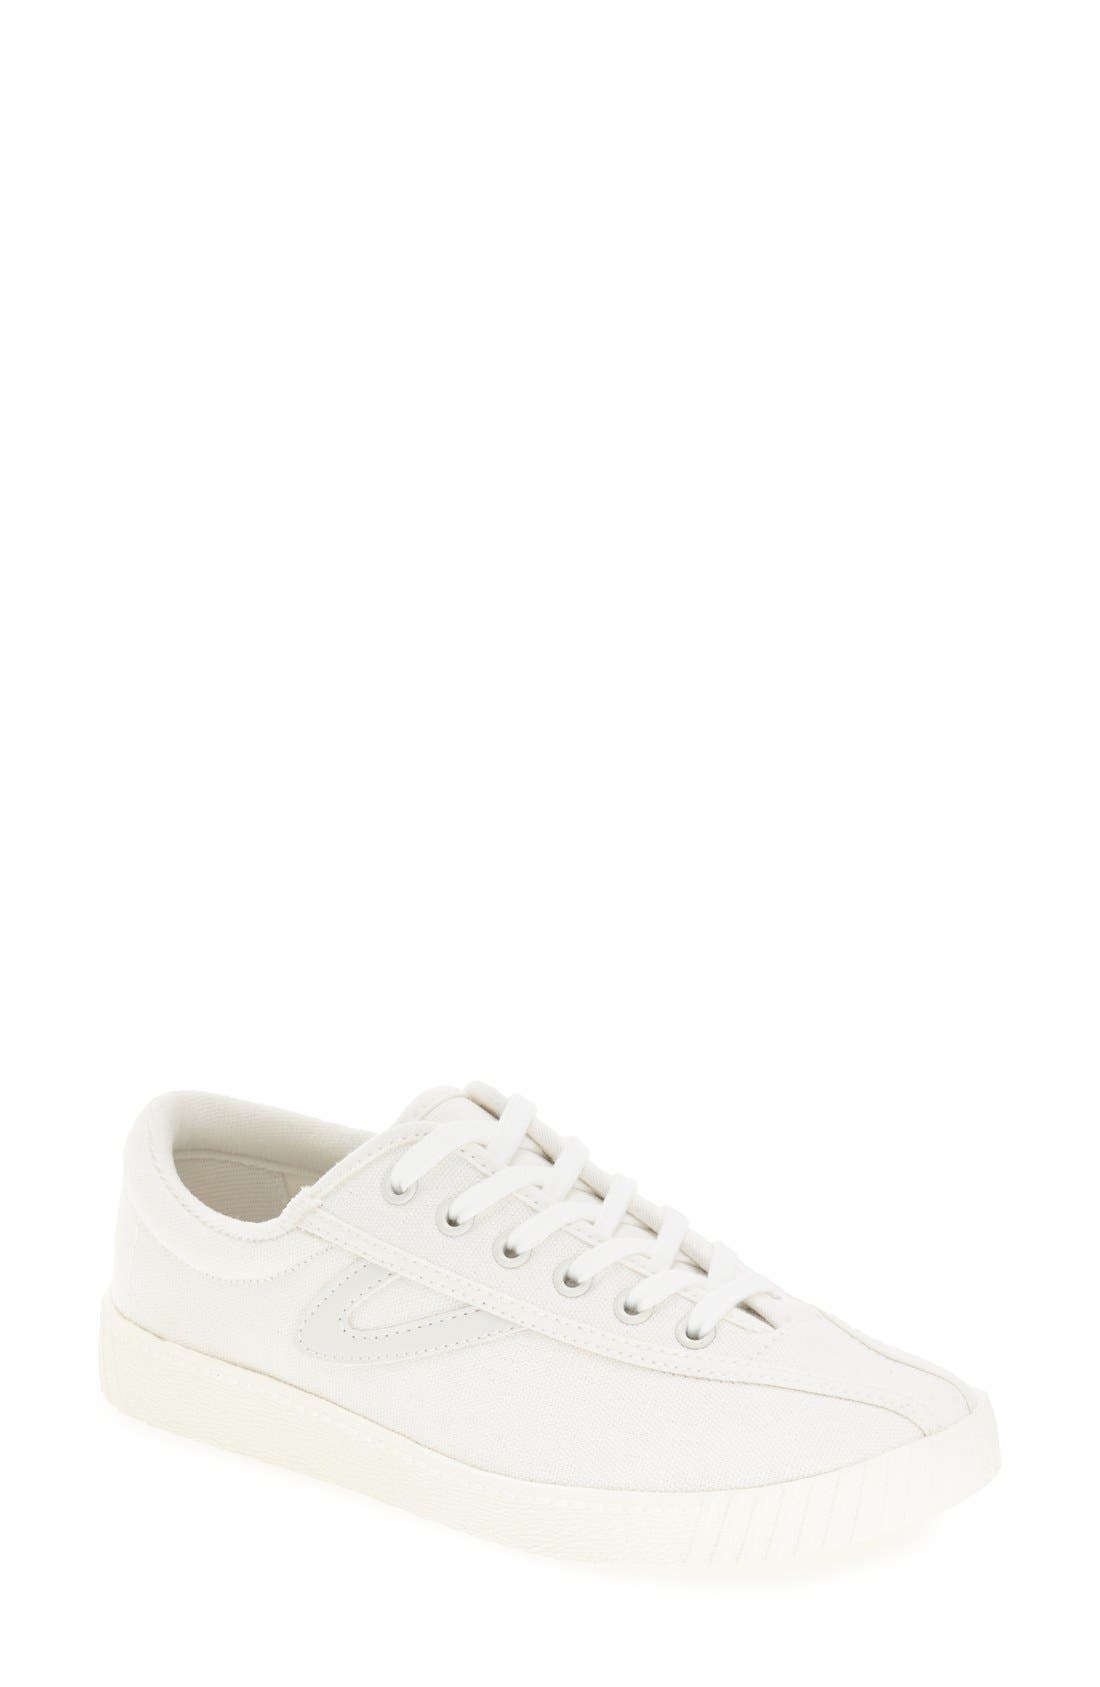 white leather tretorn shoes